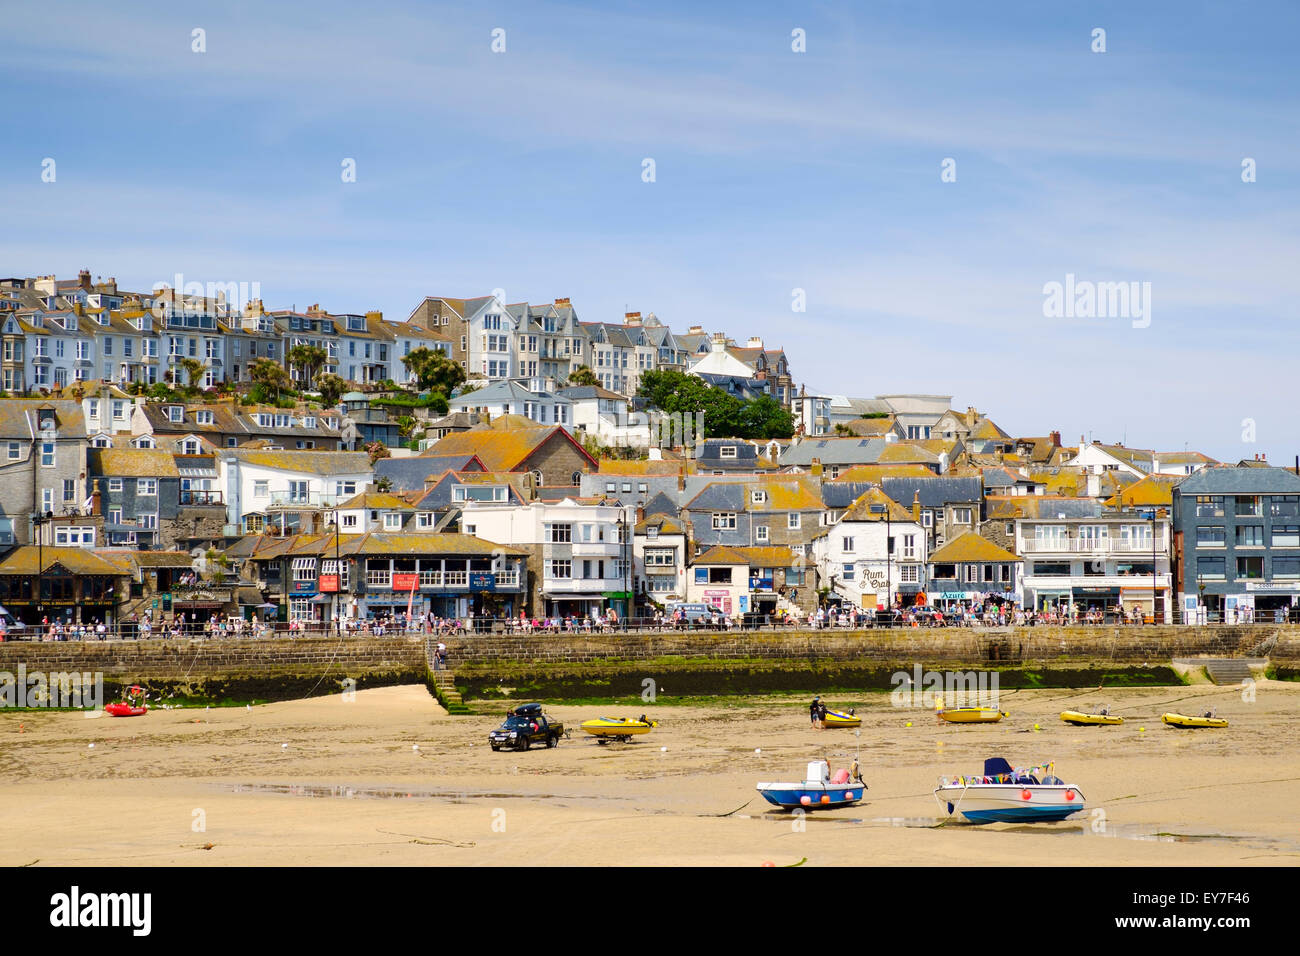 Promenade and town at St Ives, Cornwall, England, UK in summer Stock Photo